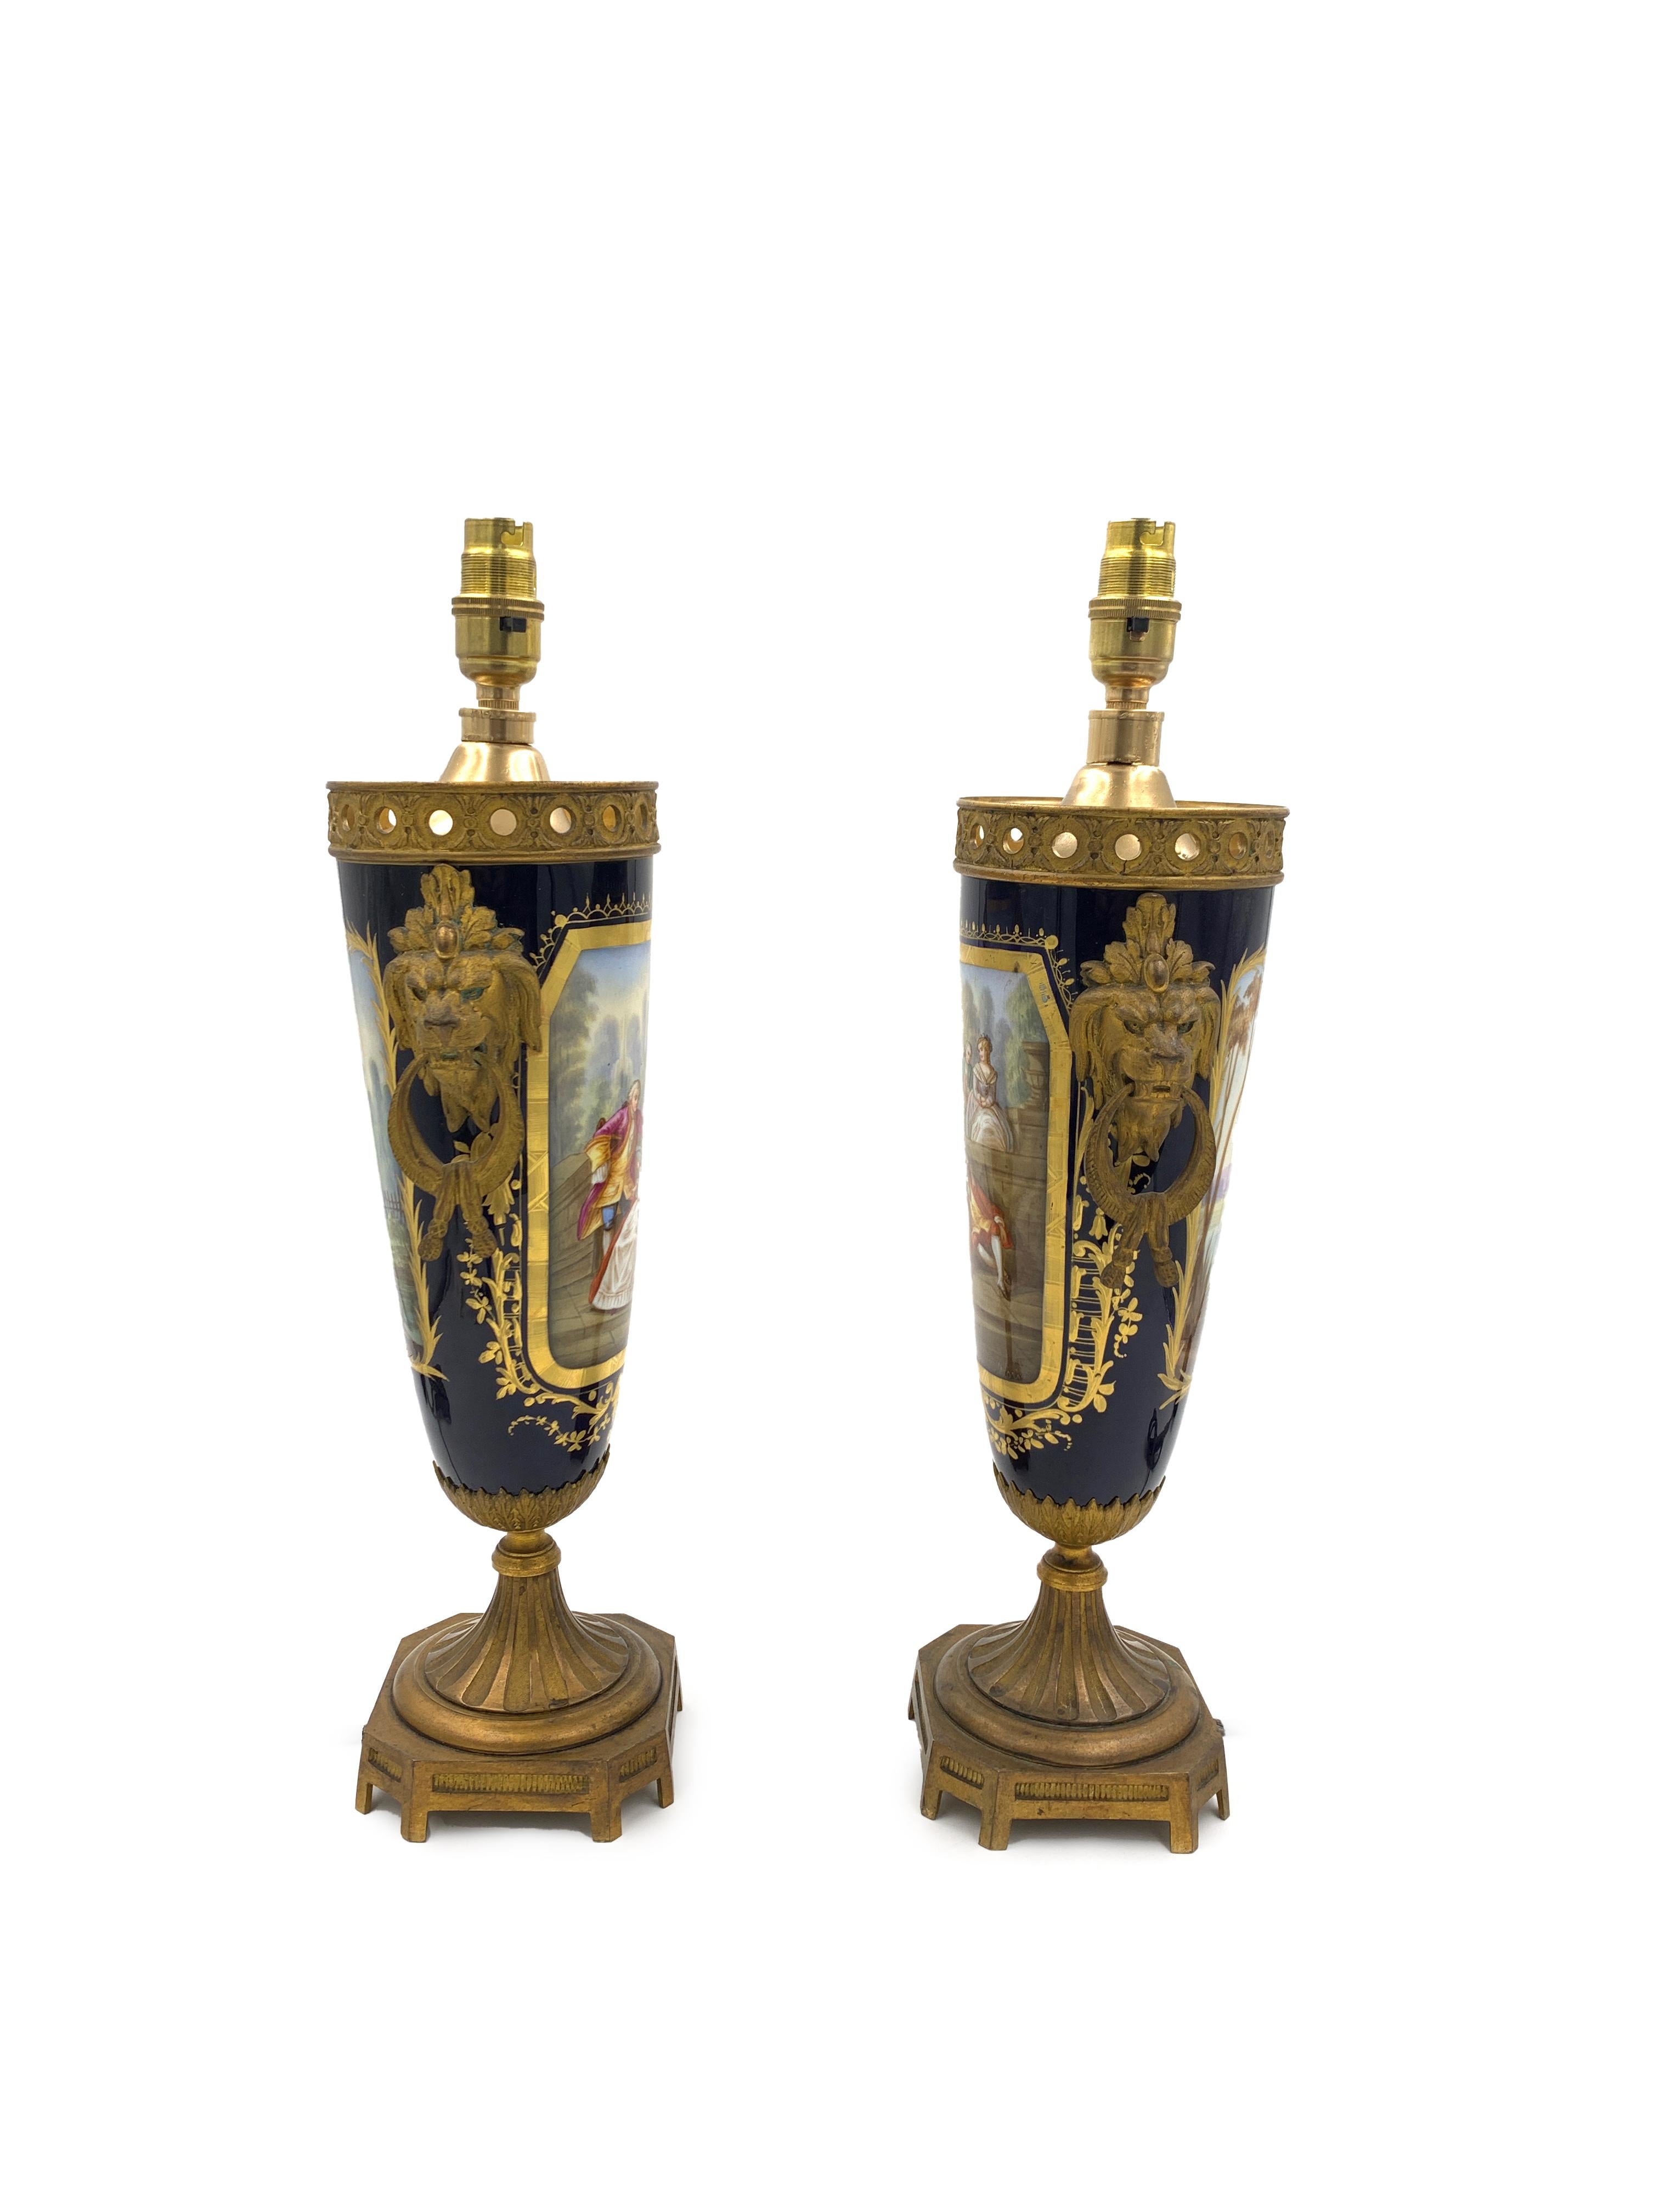 Pair of Sèvres Style and Ormolu French Hand-Painted Porcelain Table Lamps In Good Condition For Sale In London, GB